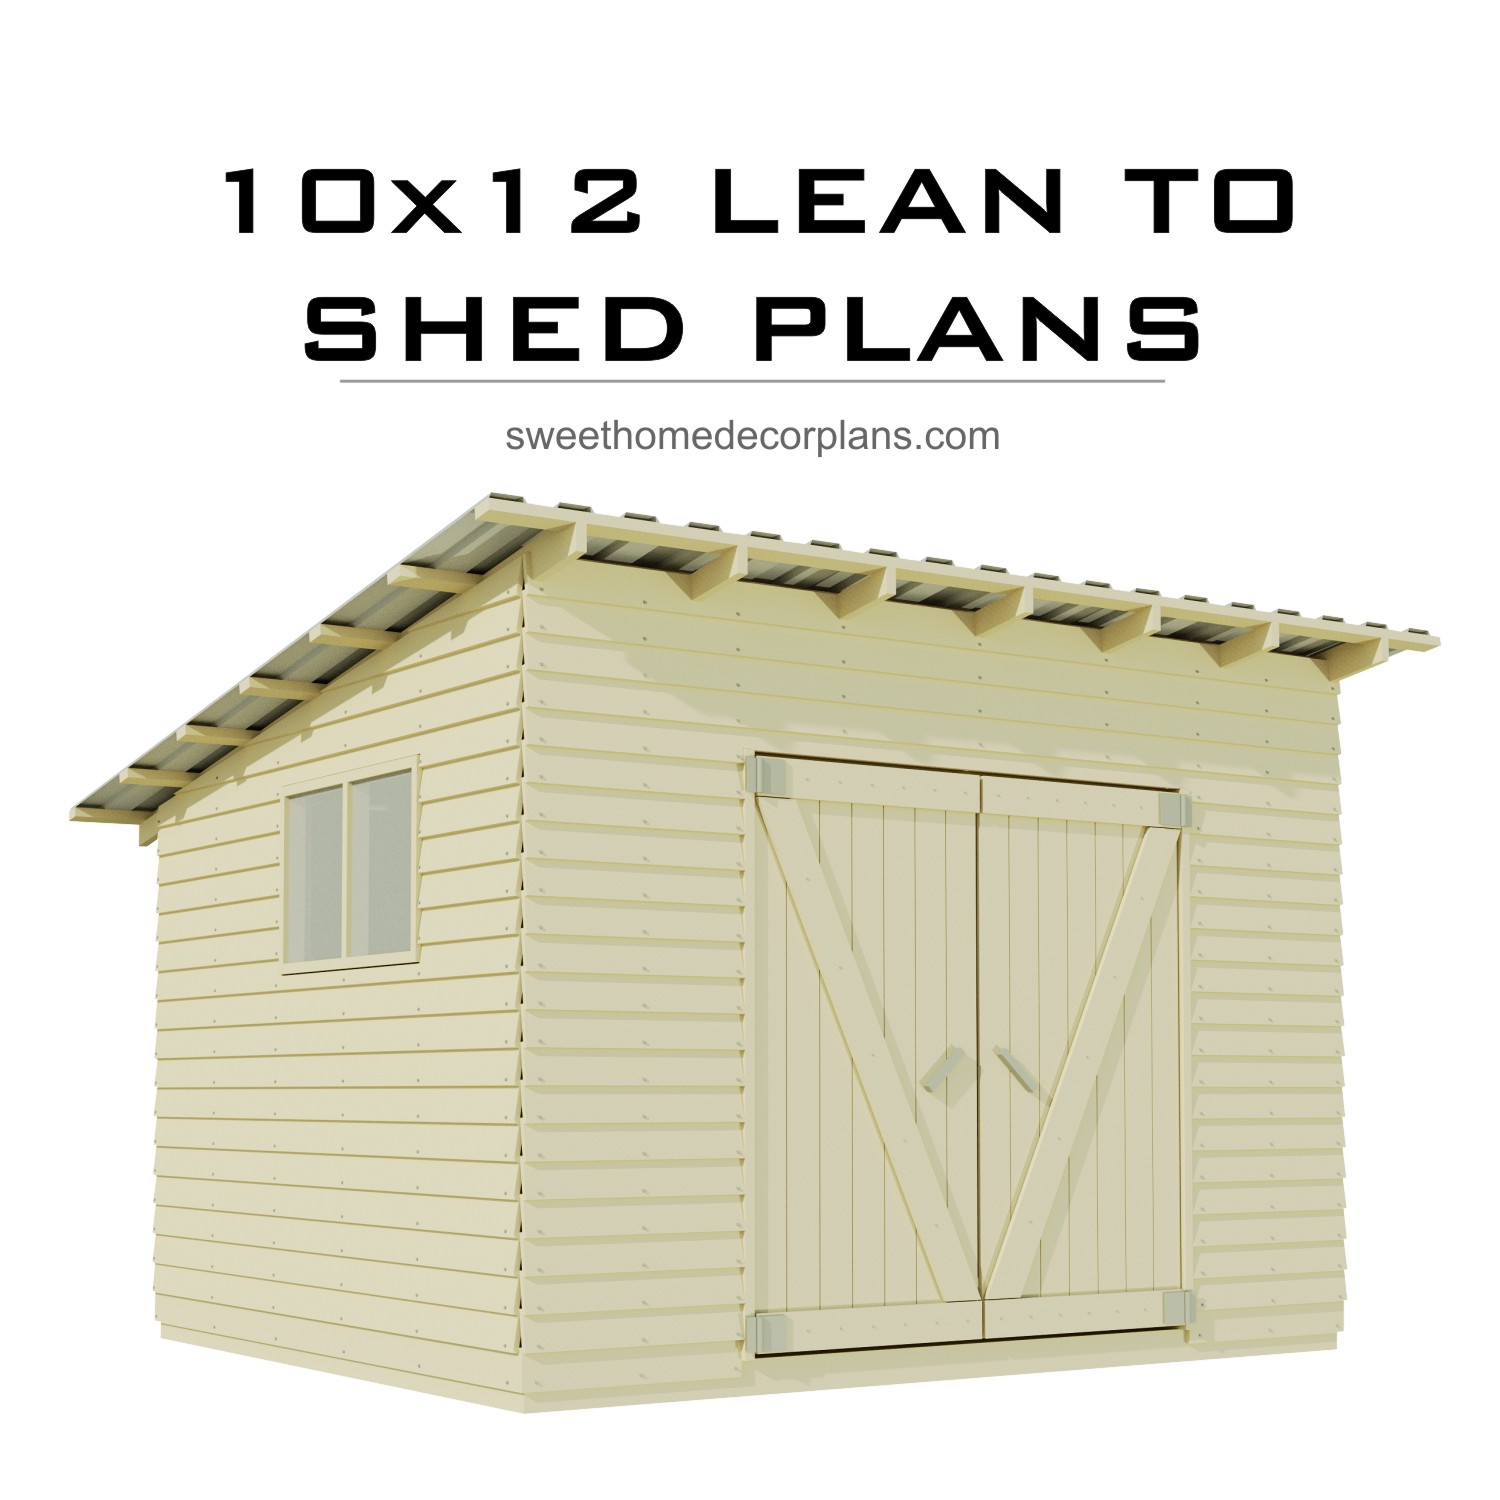 Diy-garden-10-x-12-lean-to-shed-plans-in-pdf